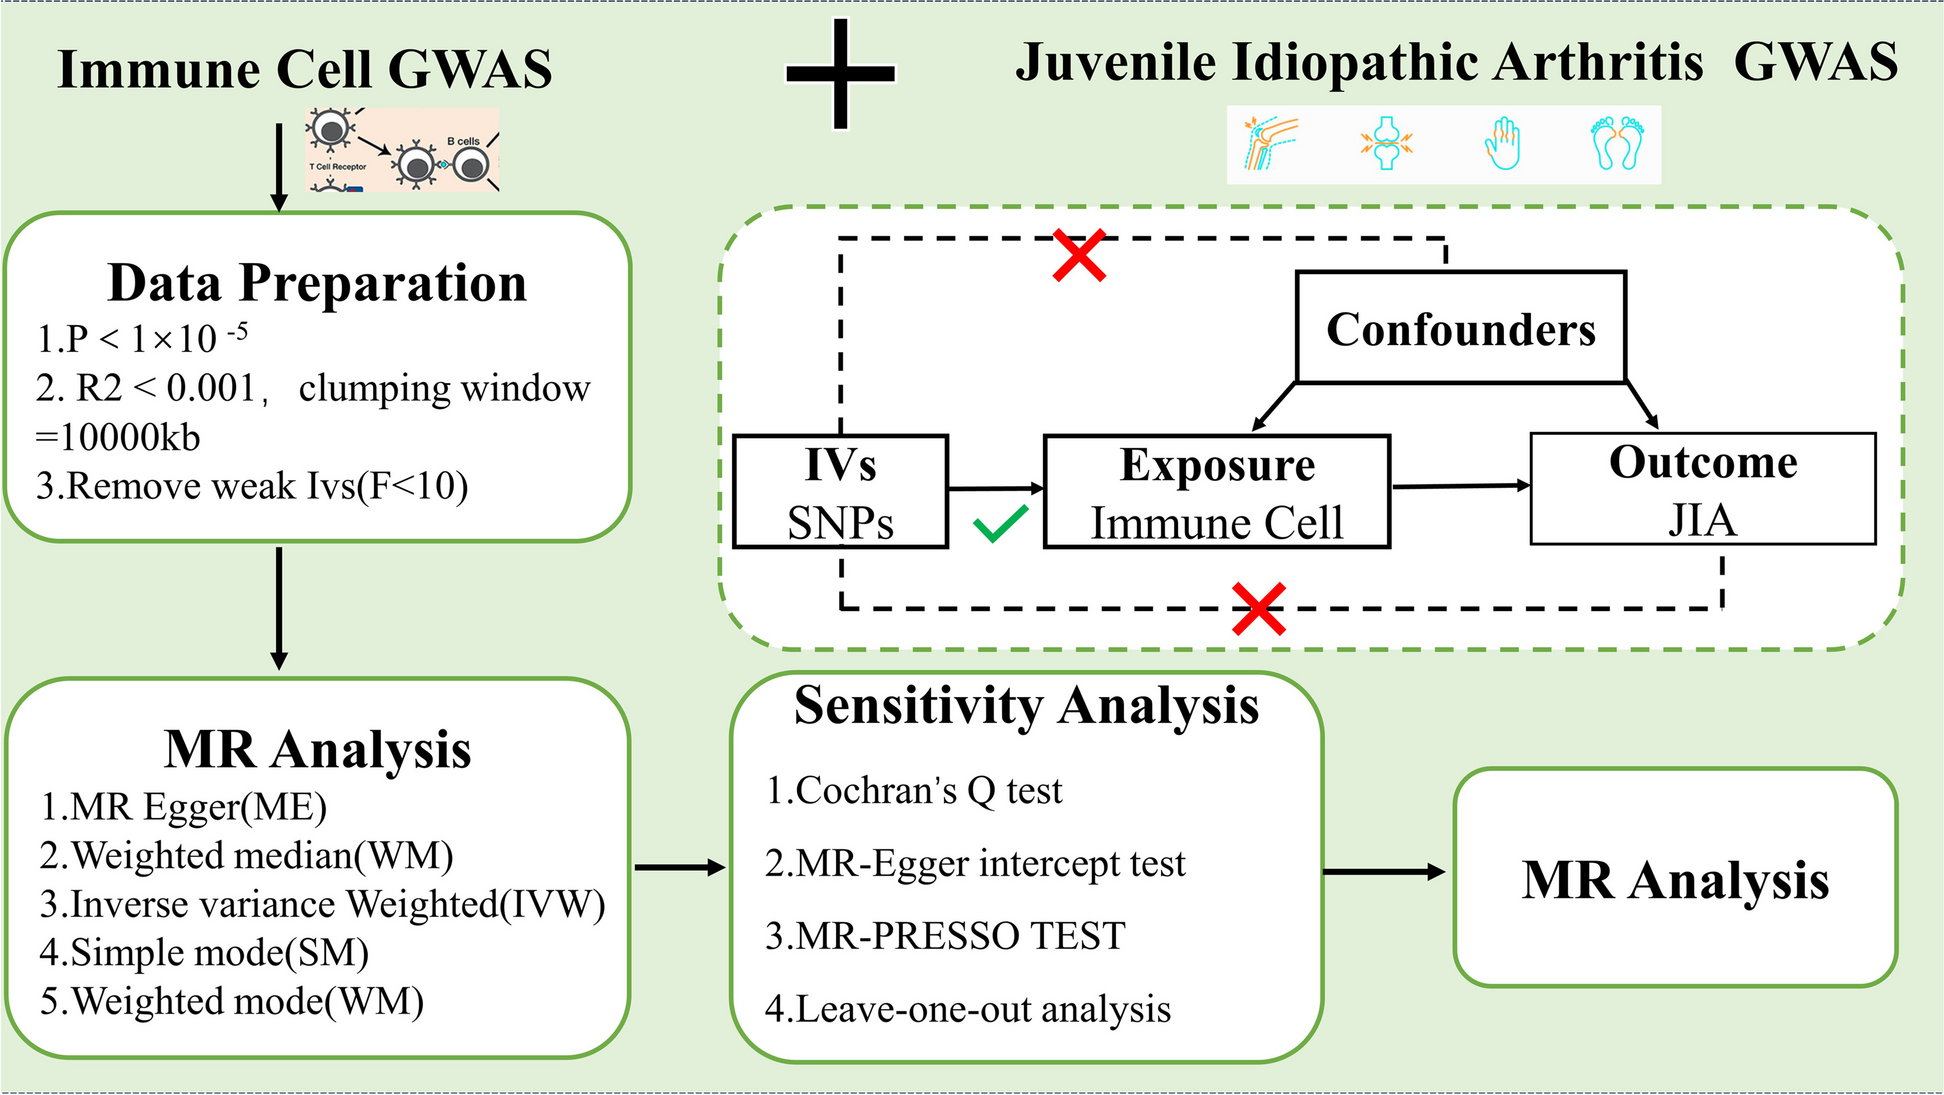 Gene association analysis to determine the causal relationship between immune cells and juvenile idiopathic arthritis